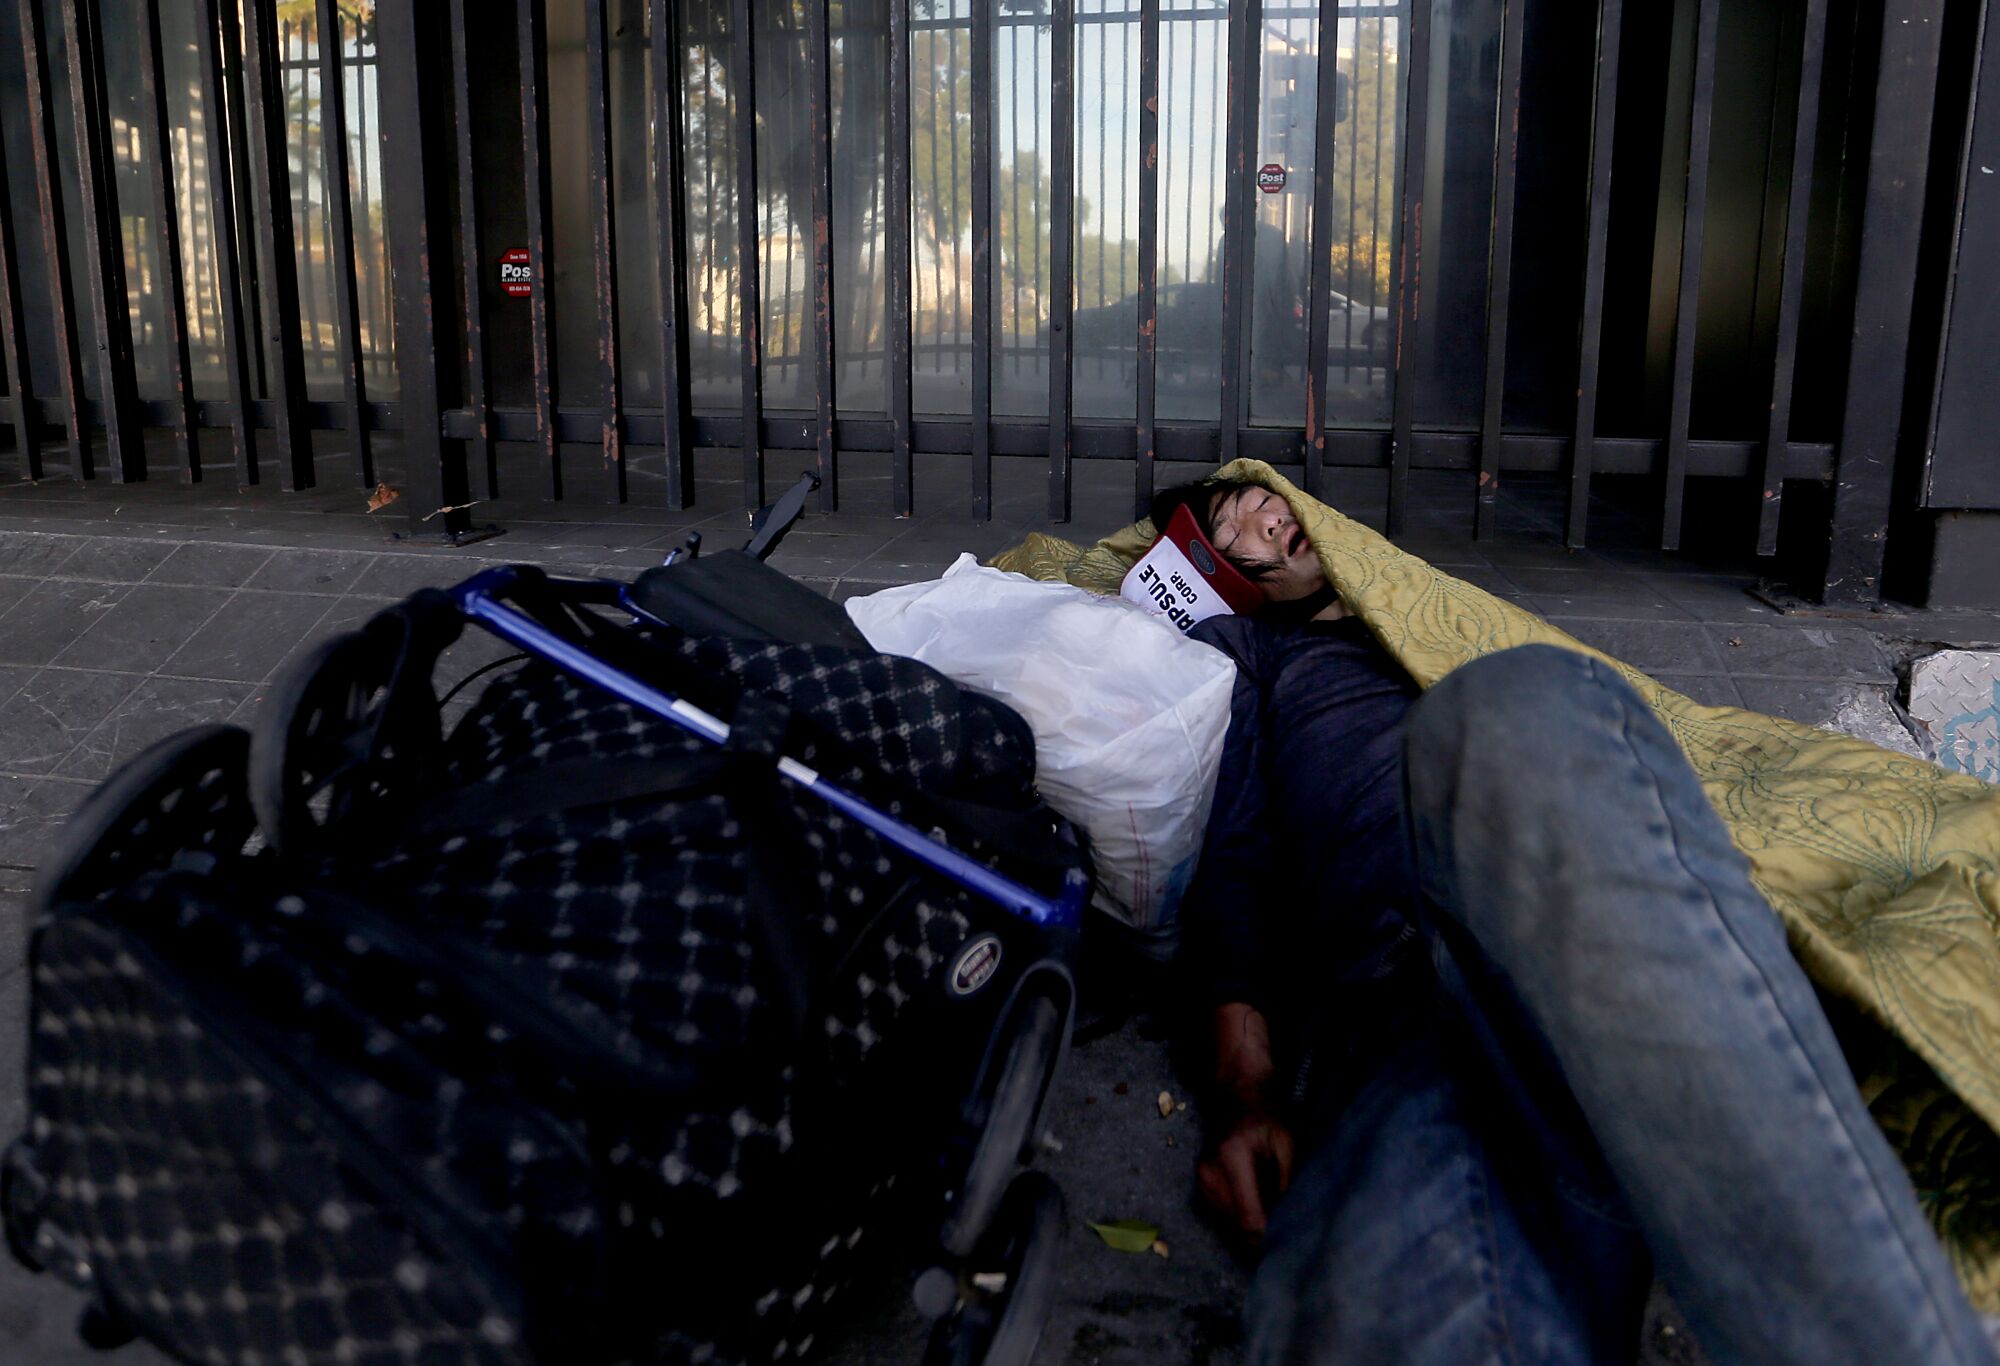  A homeless man sleeps on the street in downtown Los Angeles